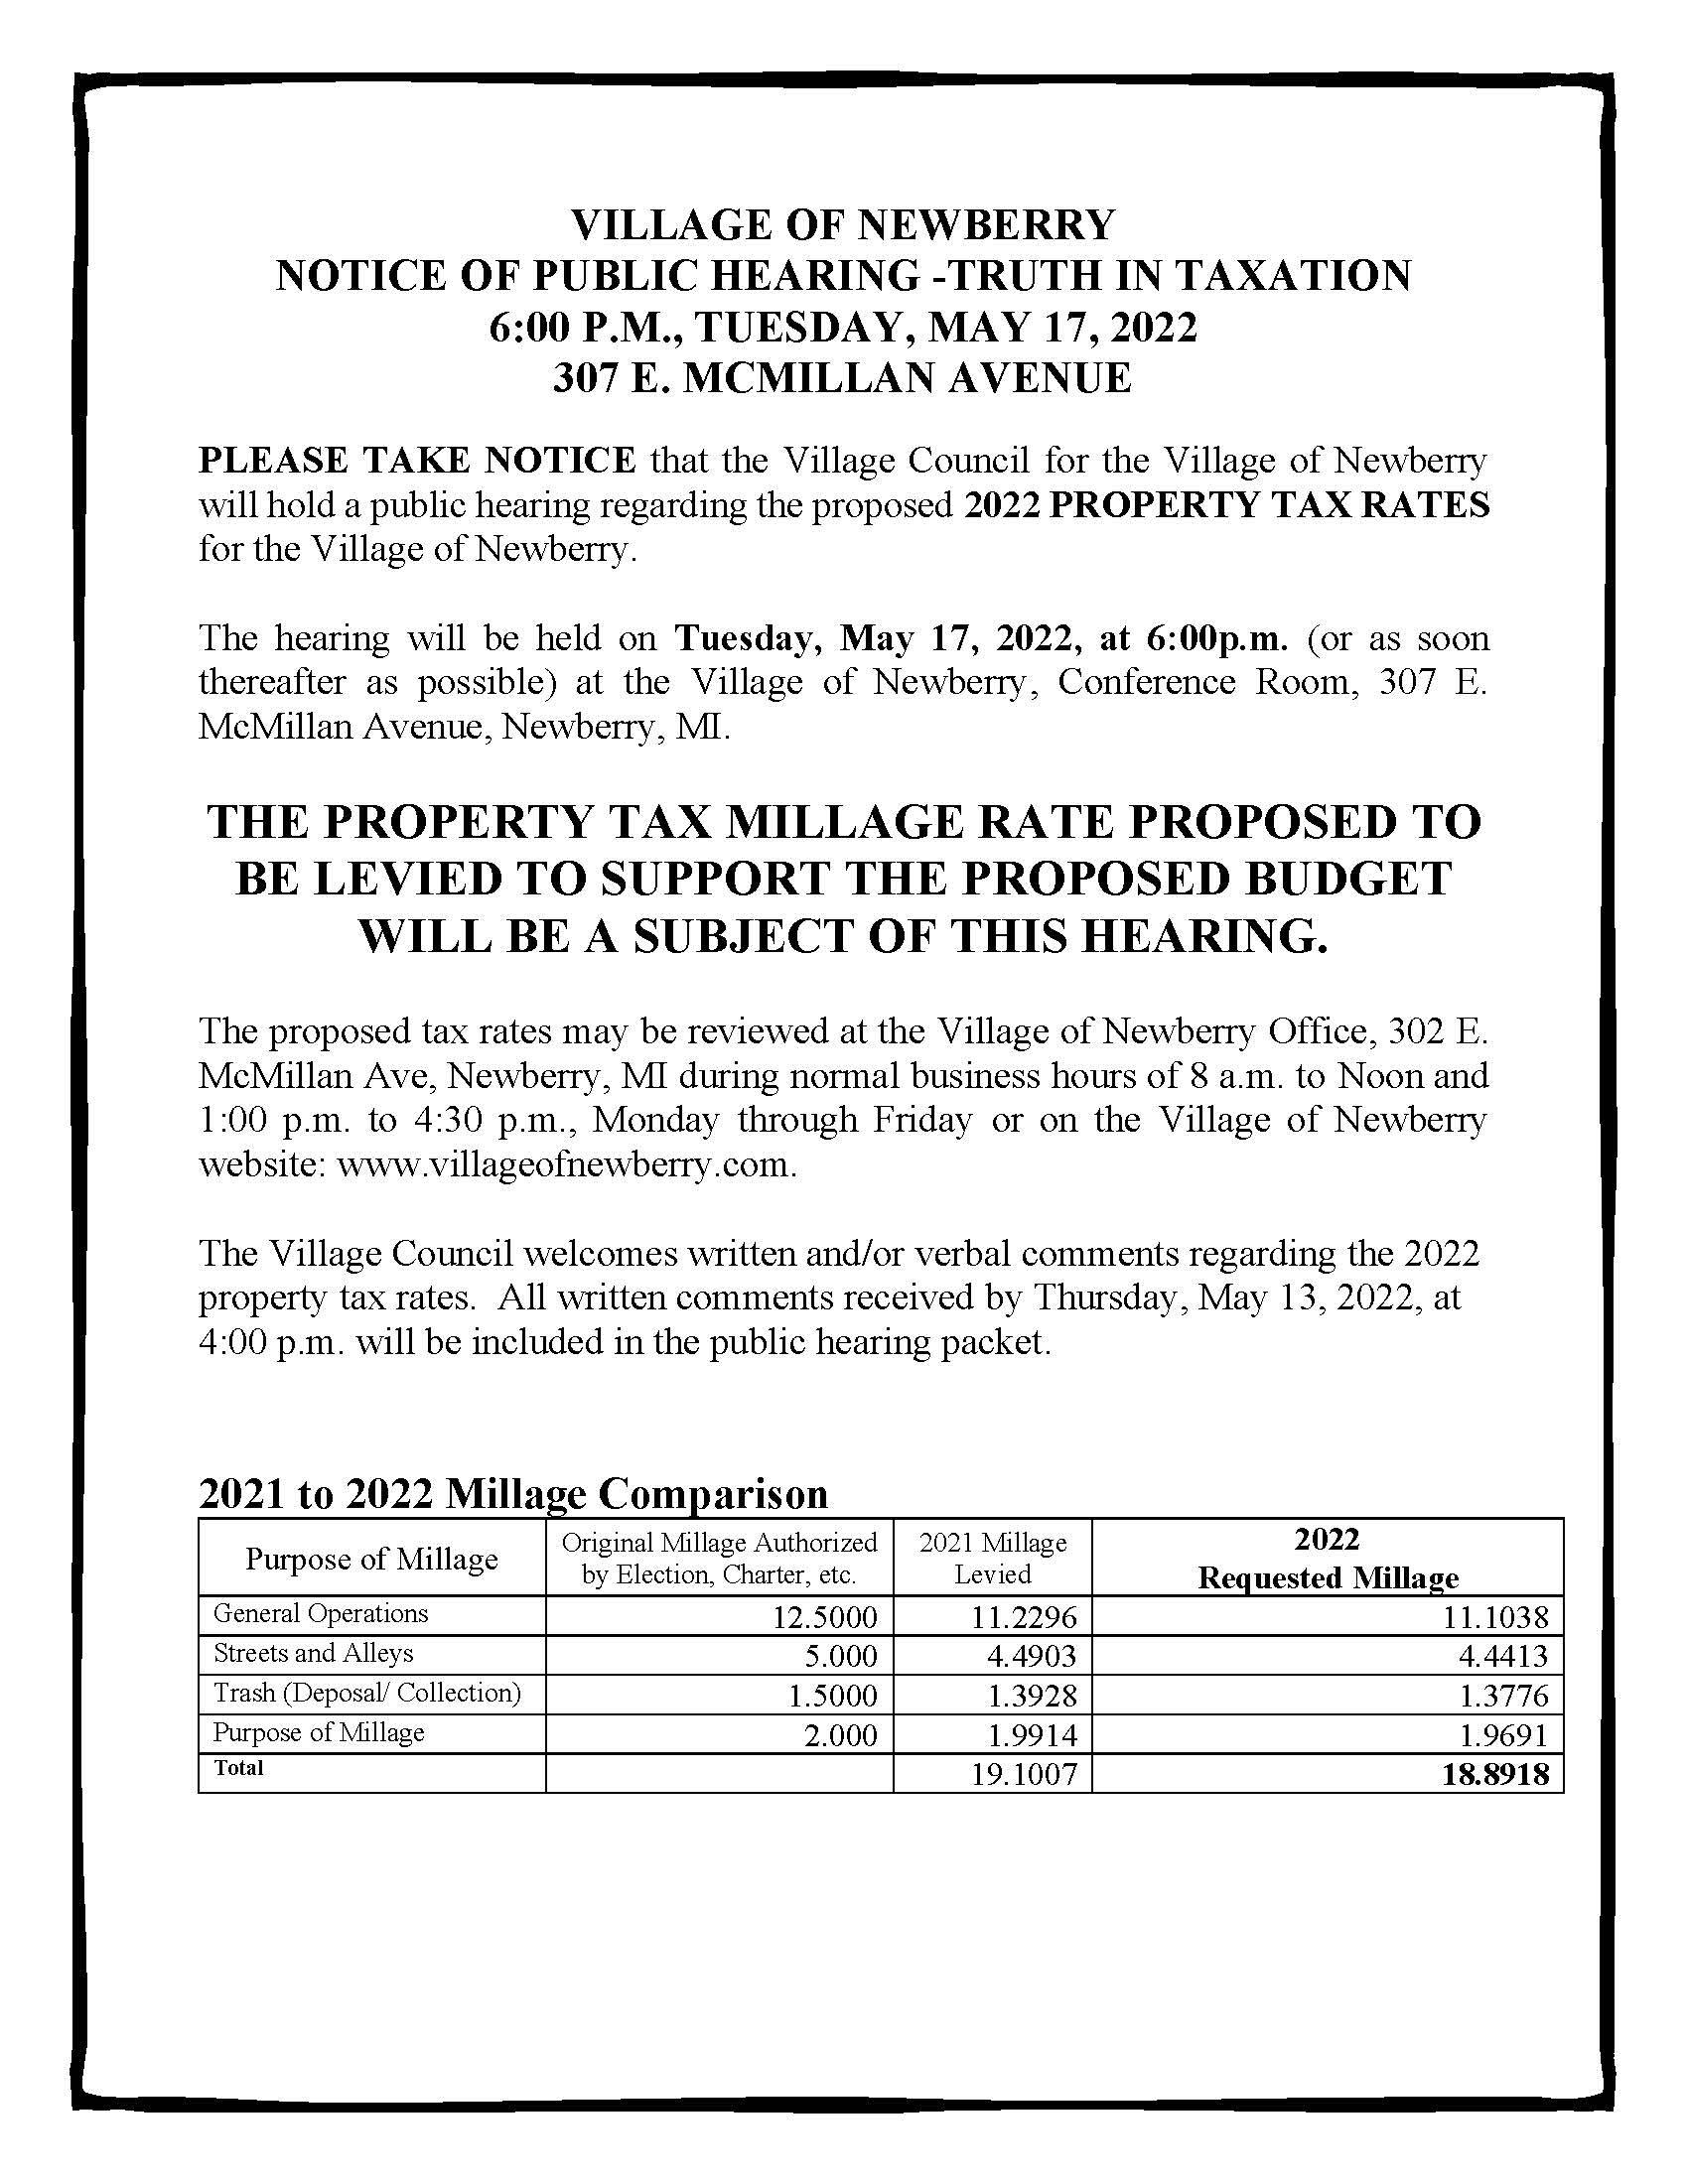 Truth_in_taxation_Notification__May_2022_for website and facebook - Copy (2)